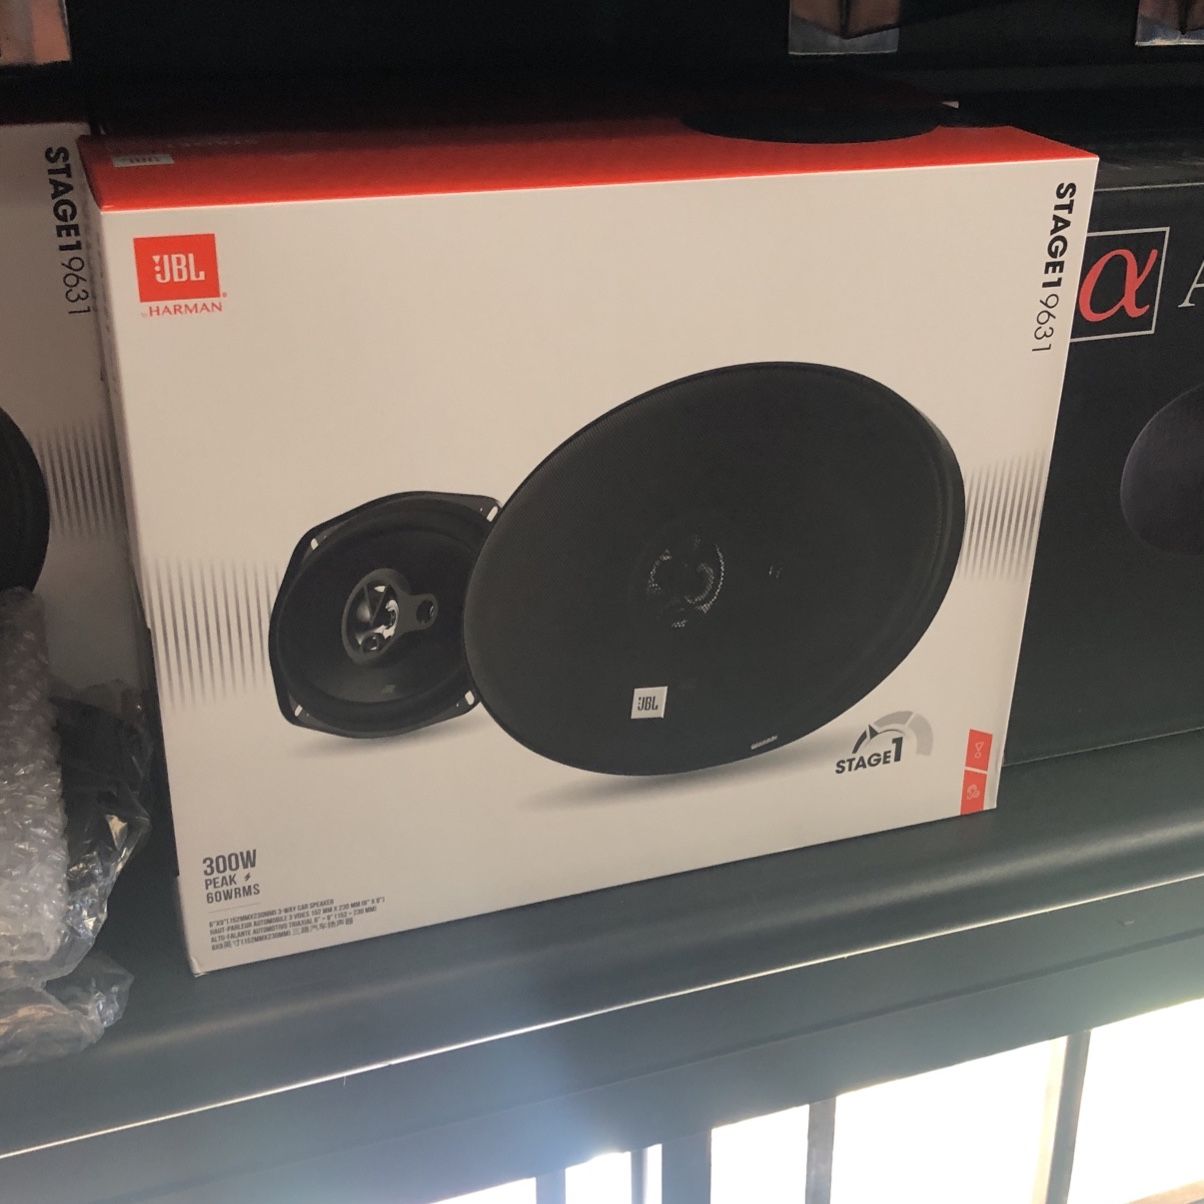 Jbl 6x9 On Sale Today For 59.99 Come And Get Hooked Uo 